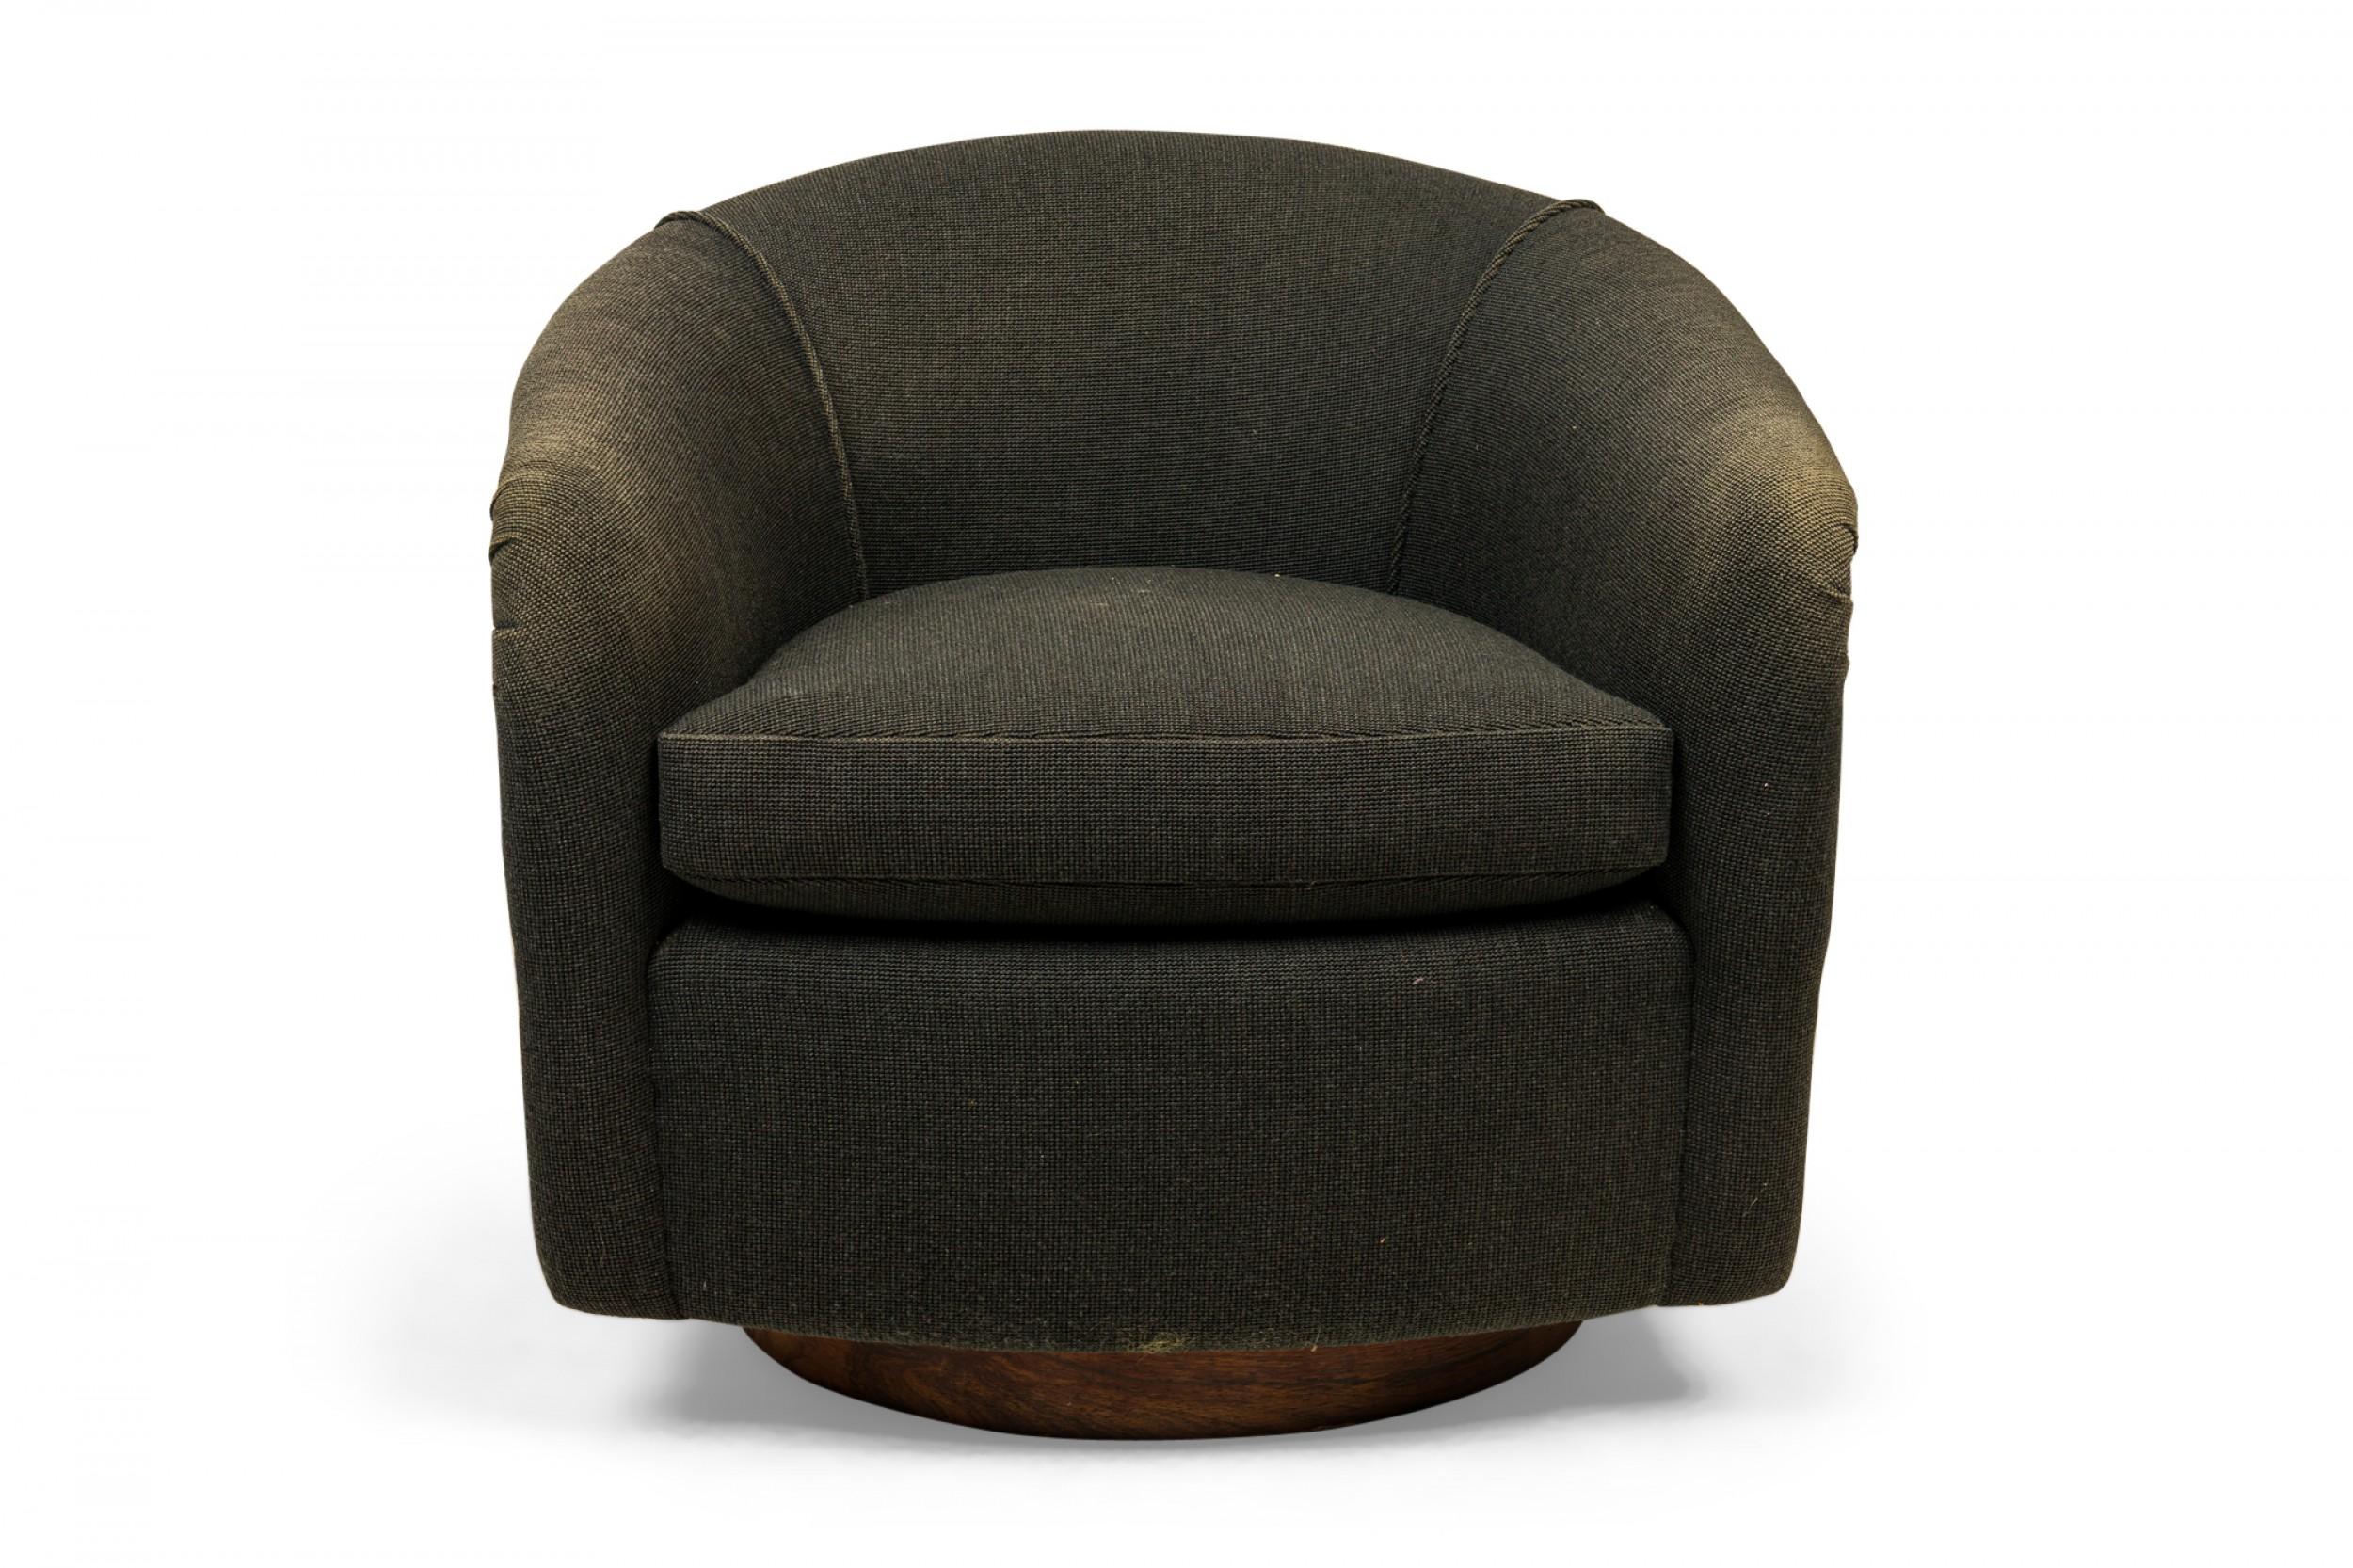 American Mid-Century horseshoe-form lounge / armchair with black textured fabric upholstery with removable seat cushion and a rosewood wrap around the back of the chair. (MILO BAUGHMAN FOR THAYER COGGIN)